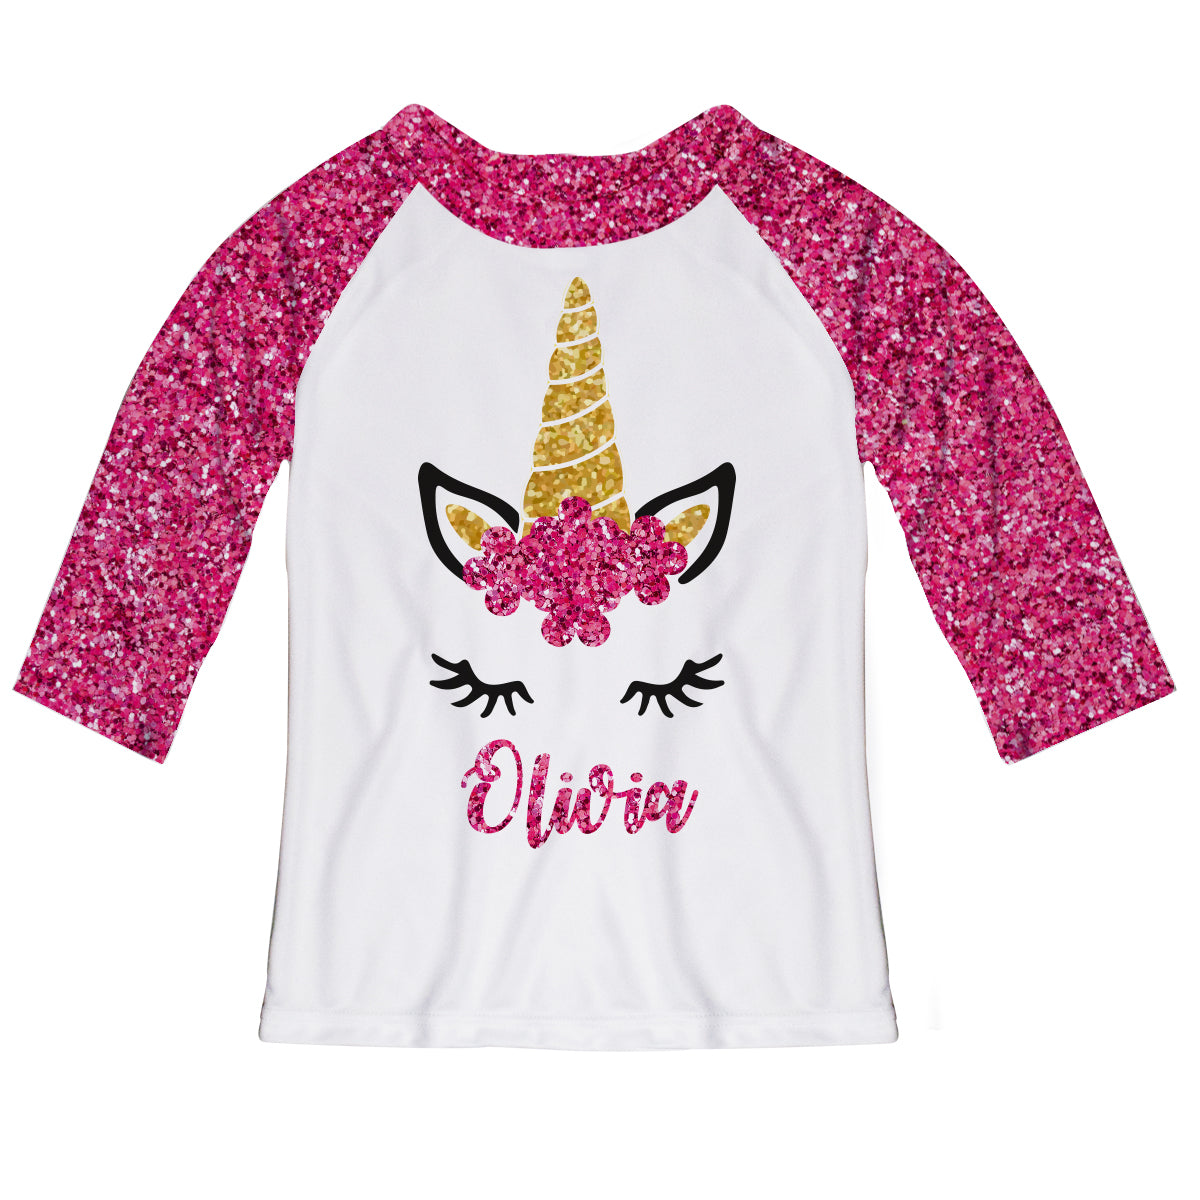 White and hot pink glitter unicorn face three quarter sleeve blouse with name - Wimziy&Co.